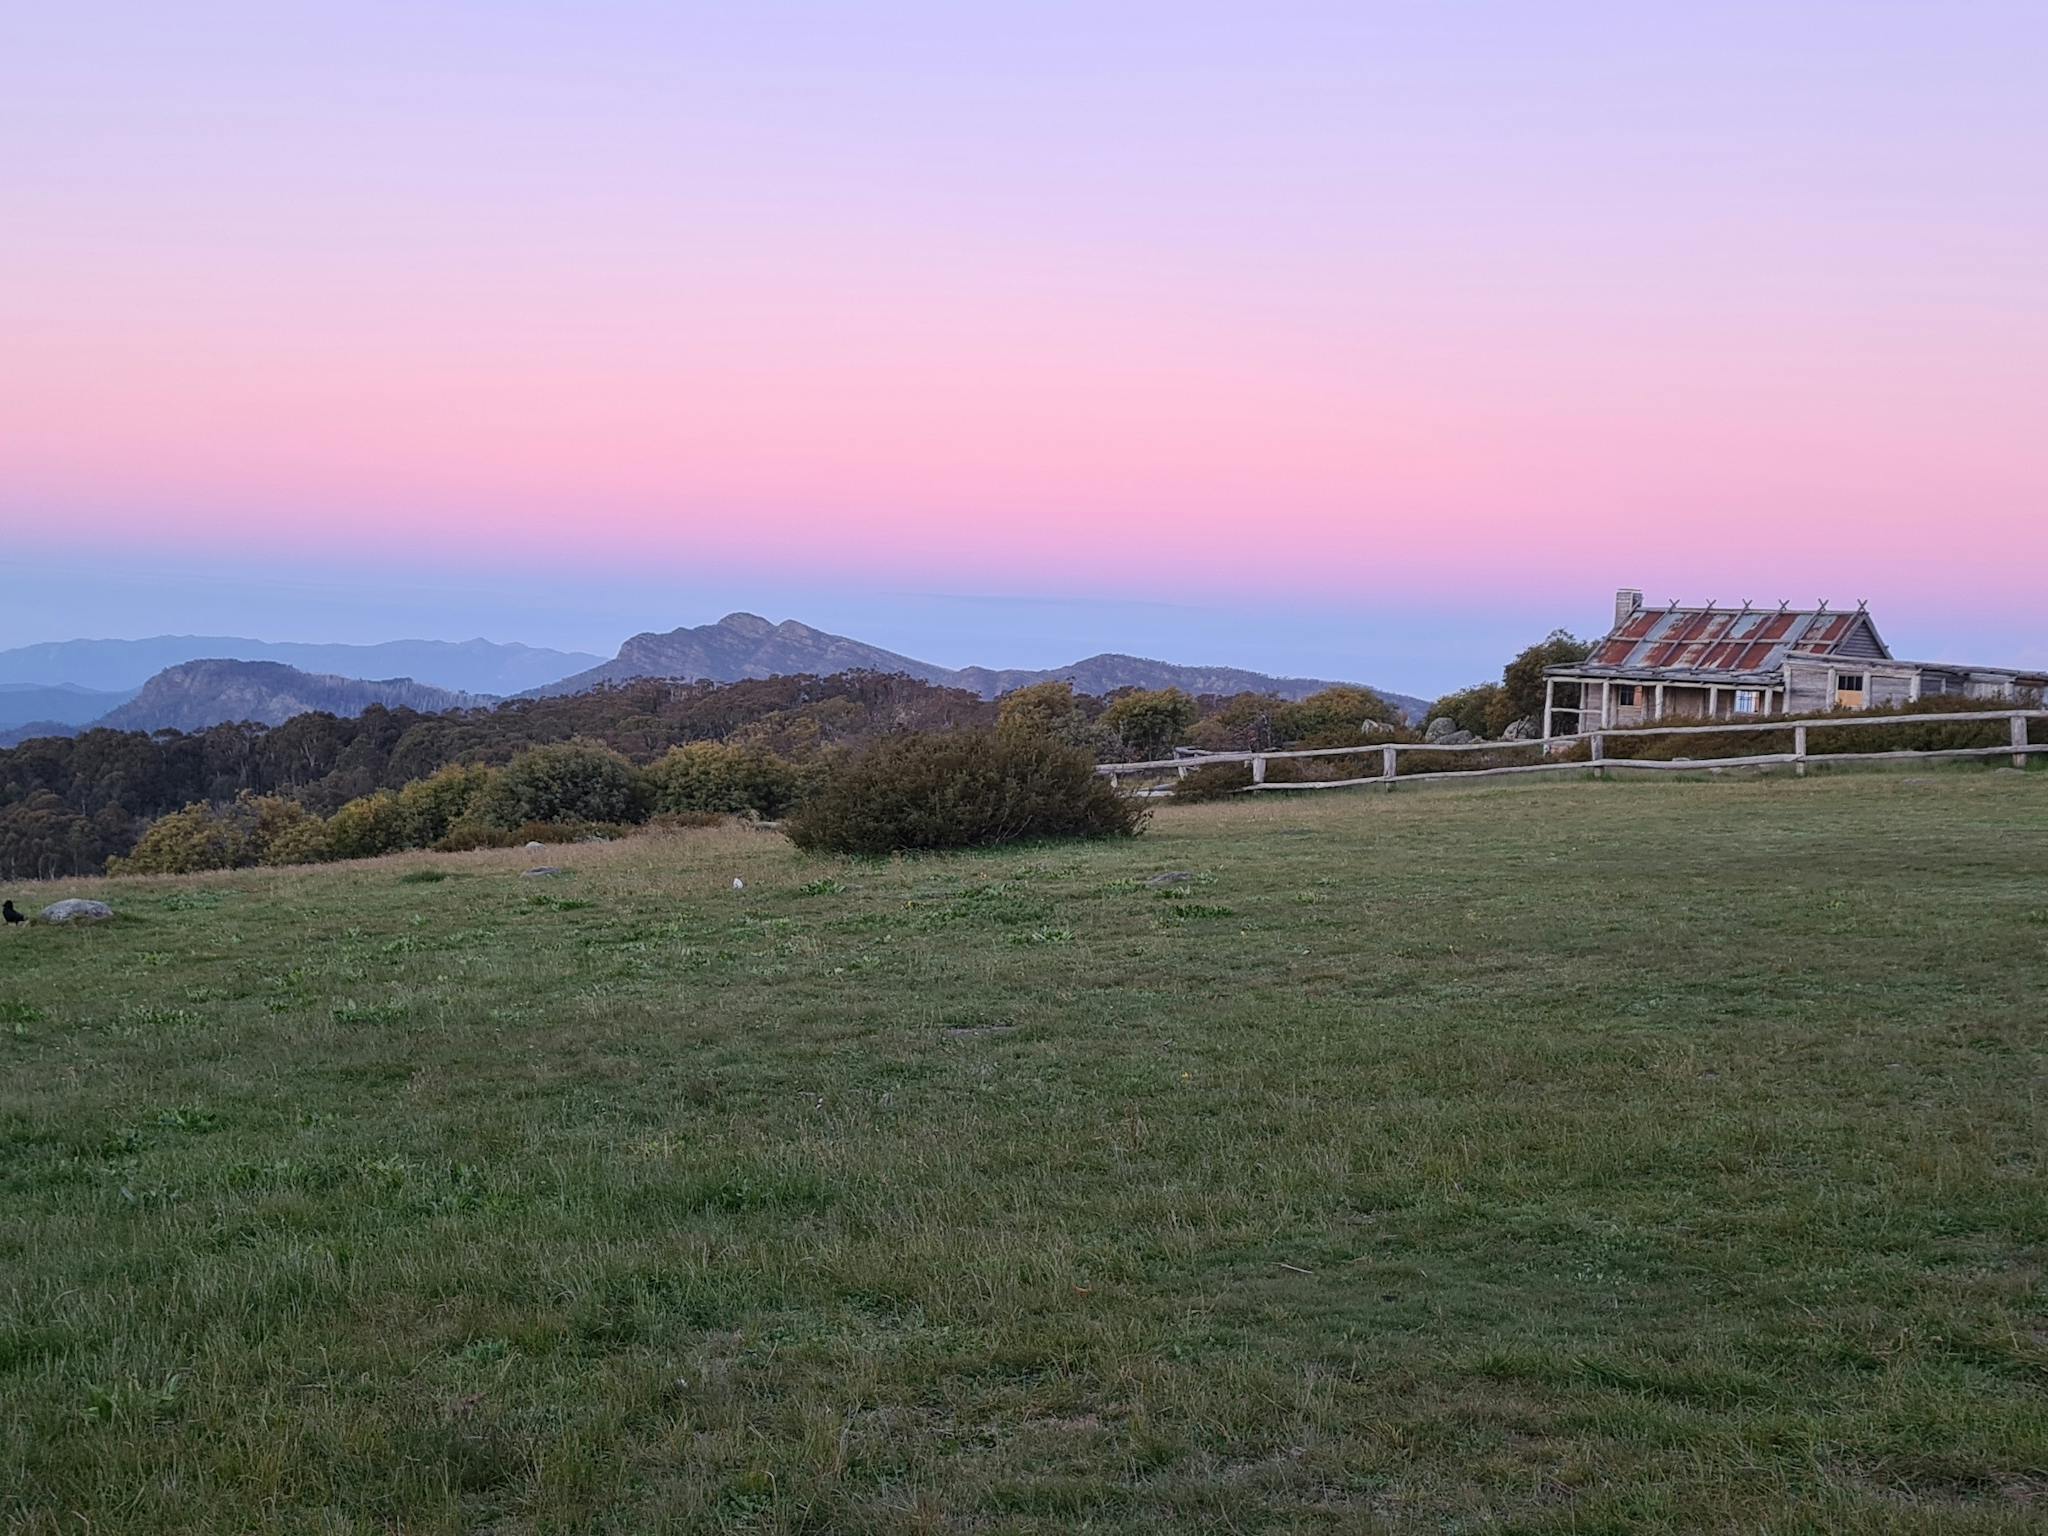 The sky at Craig's Hut coloured in soft pink and blue..